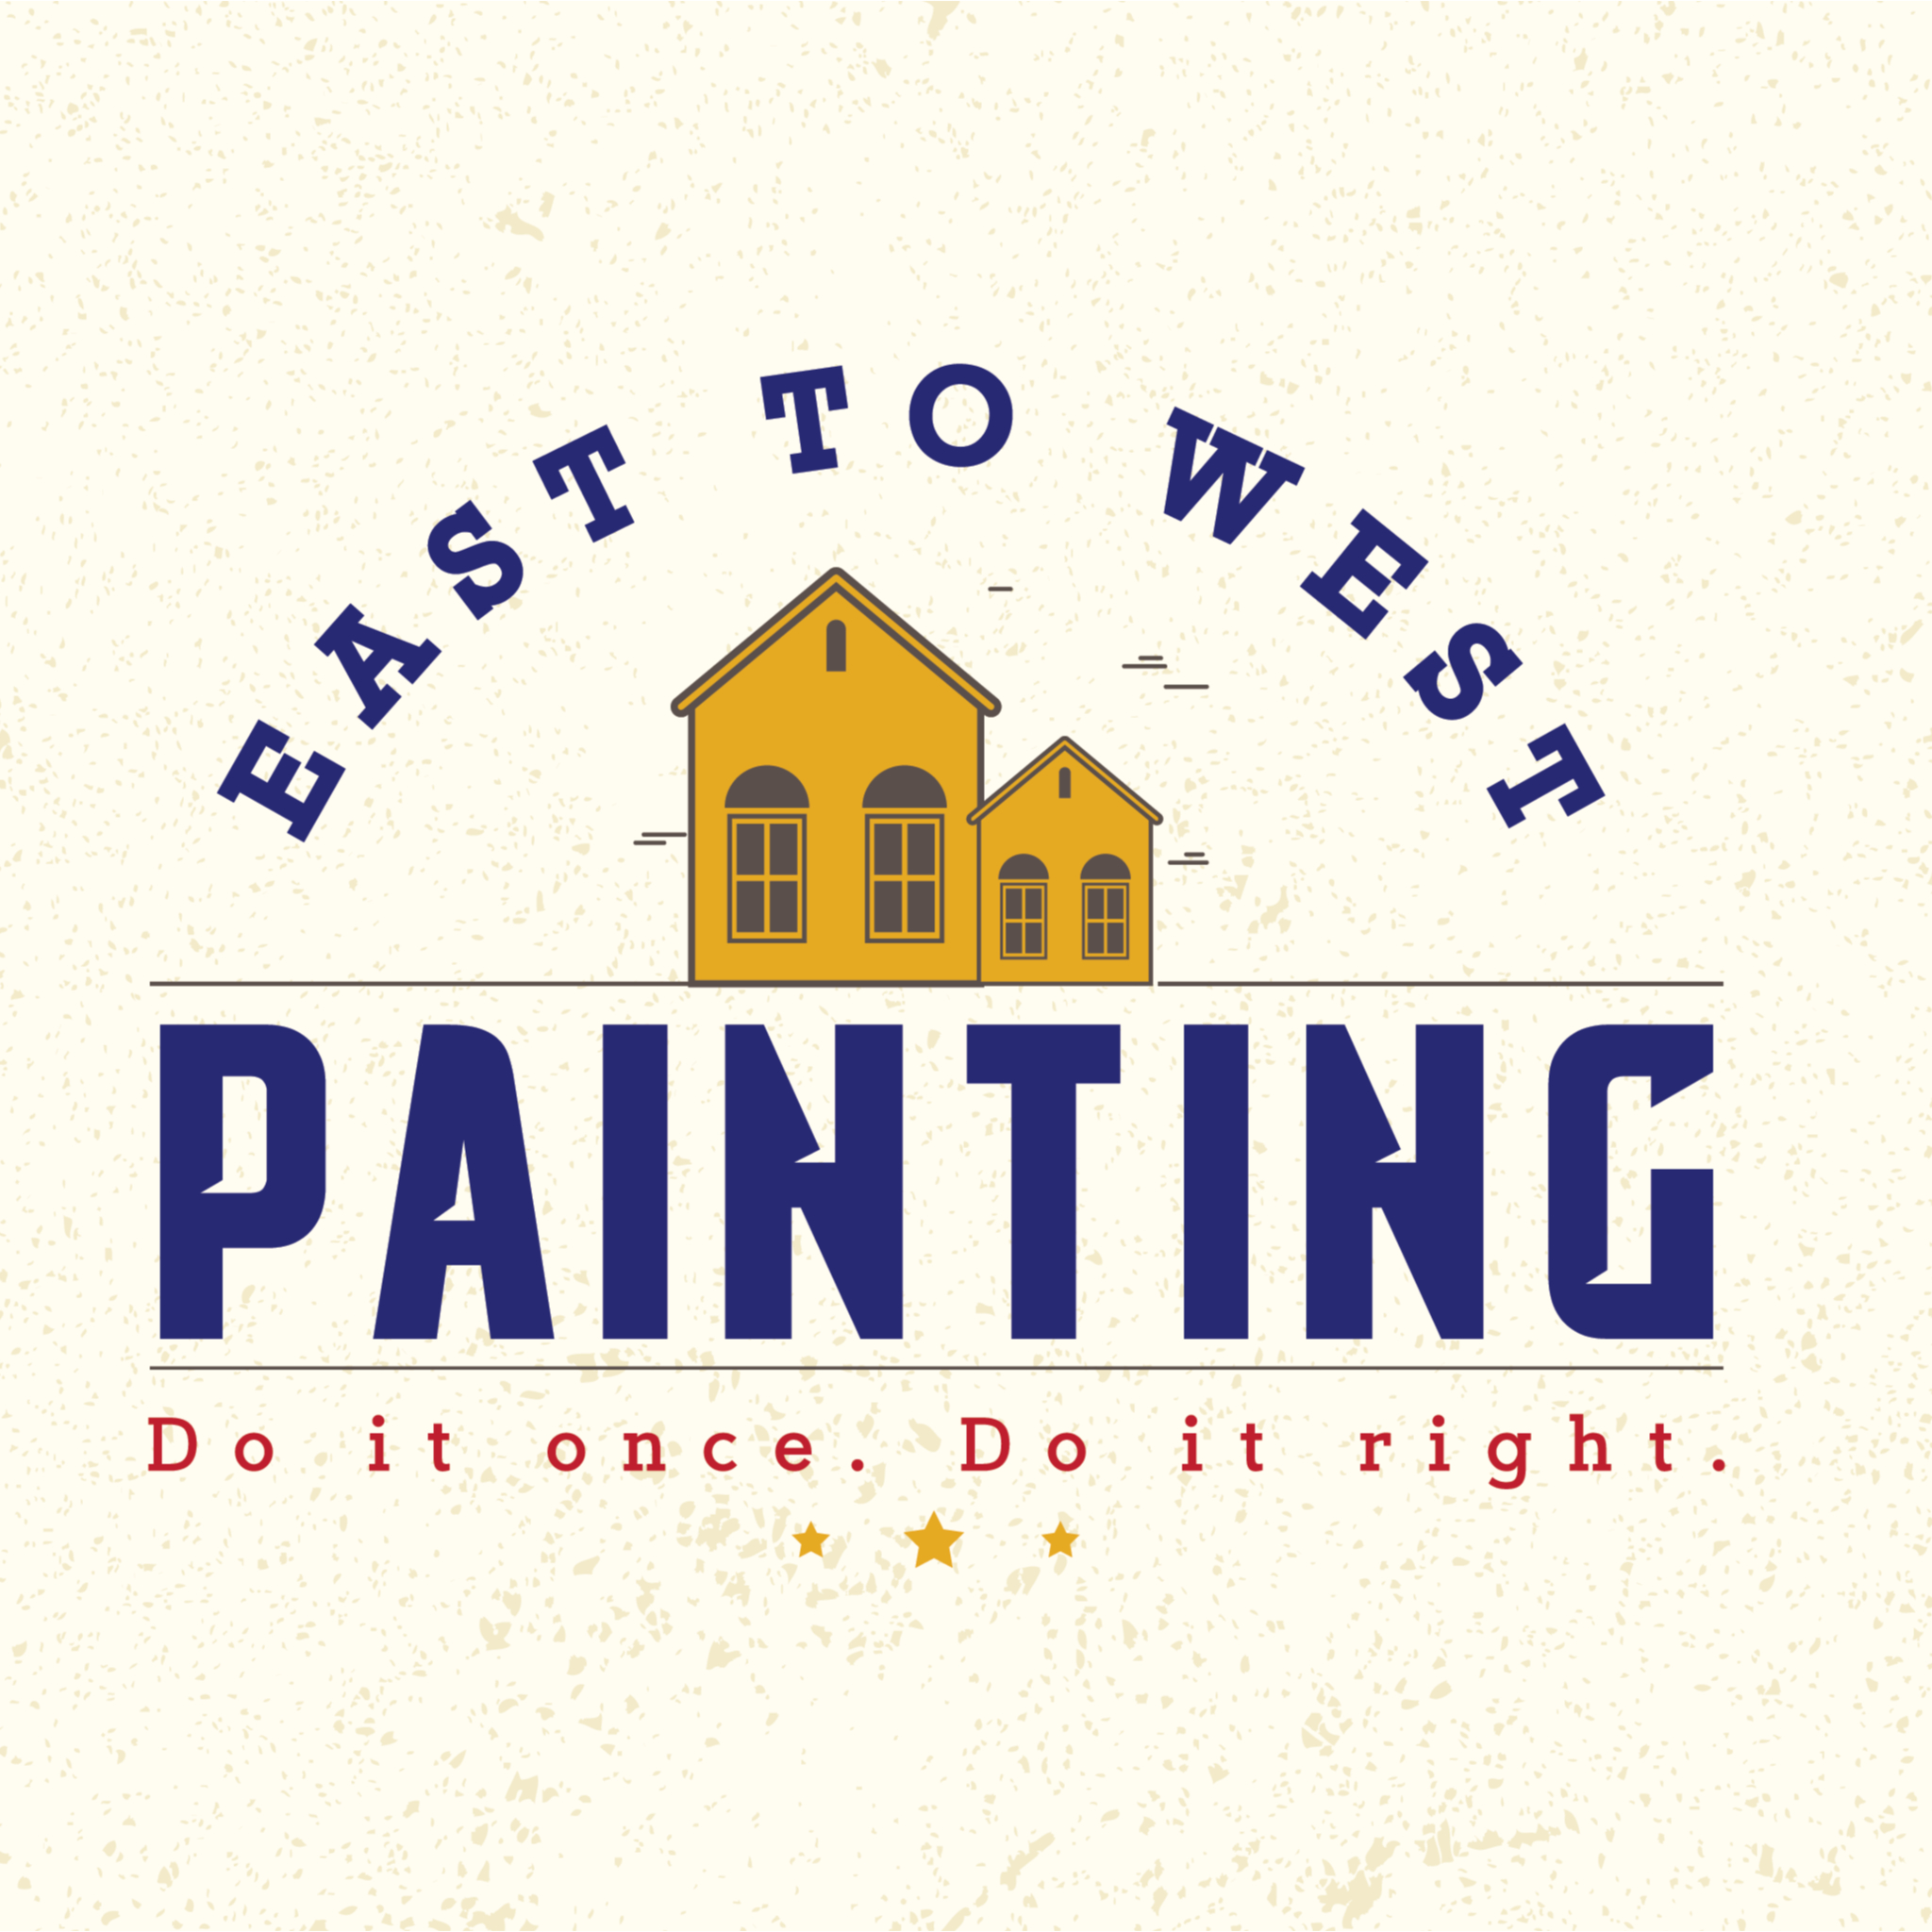 East to West Painting - Painters